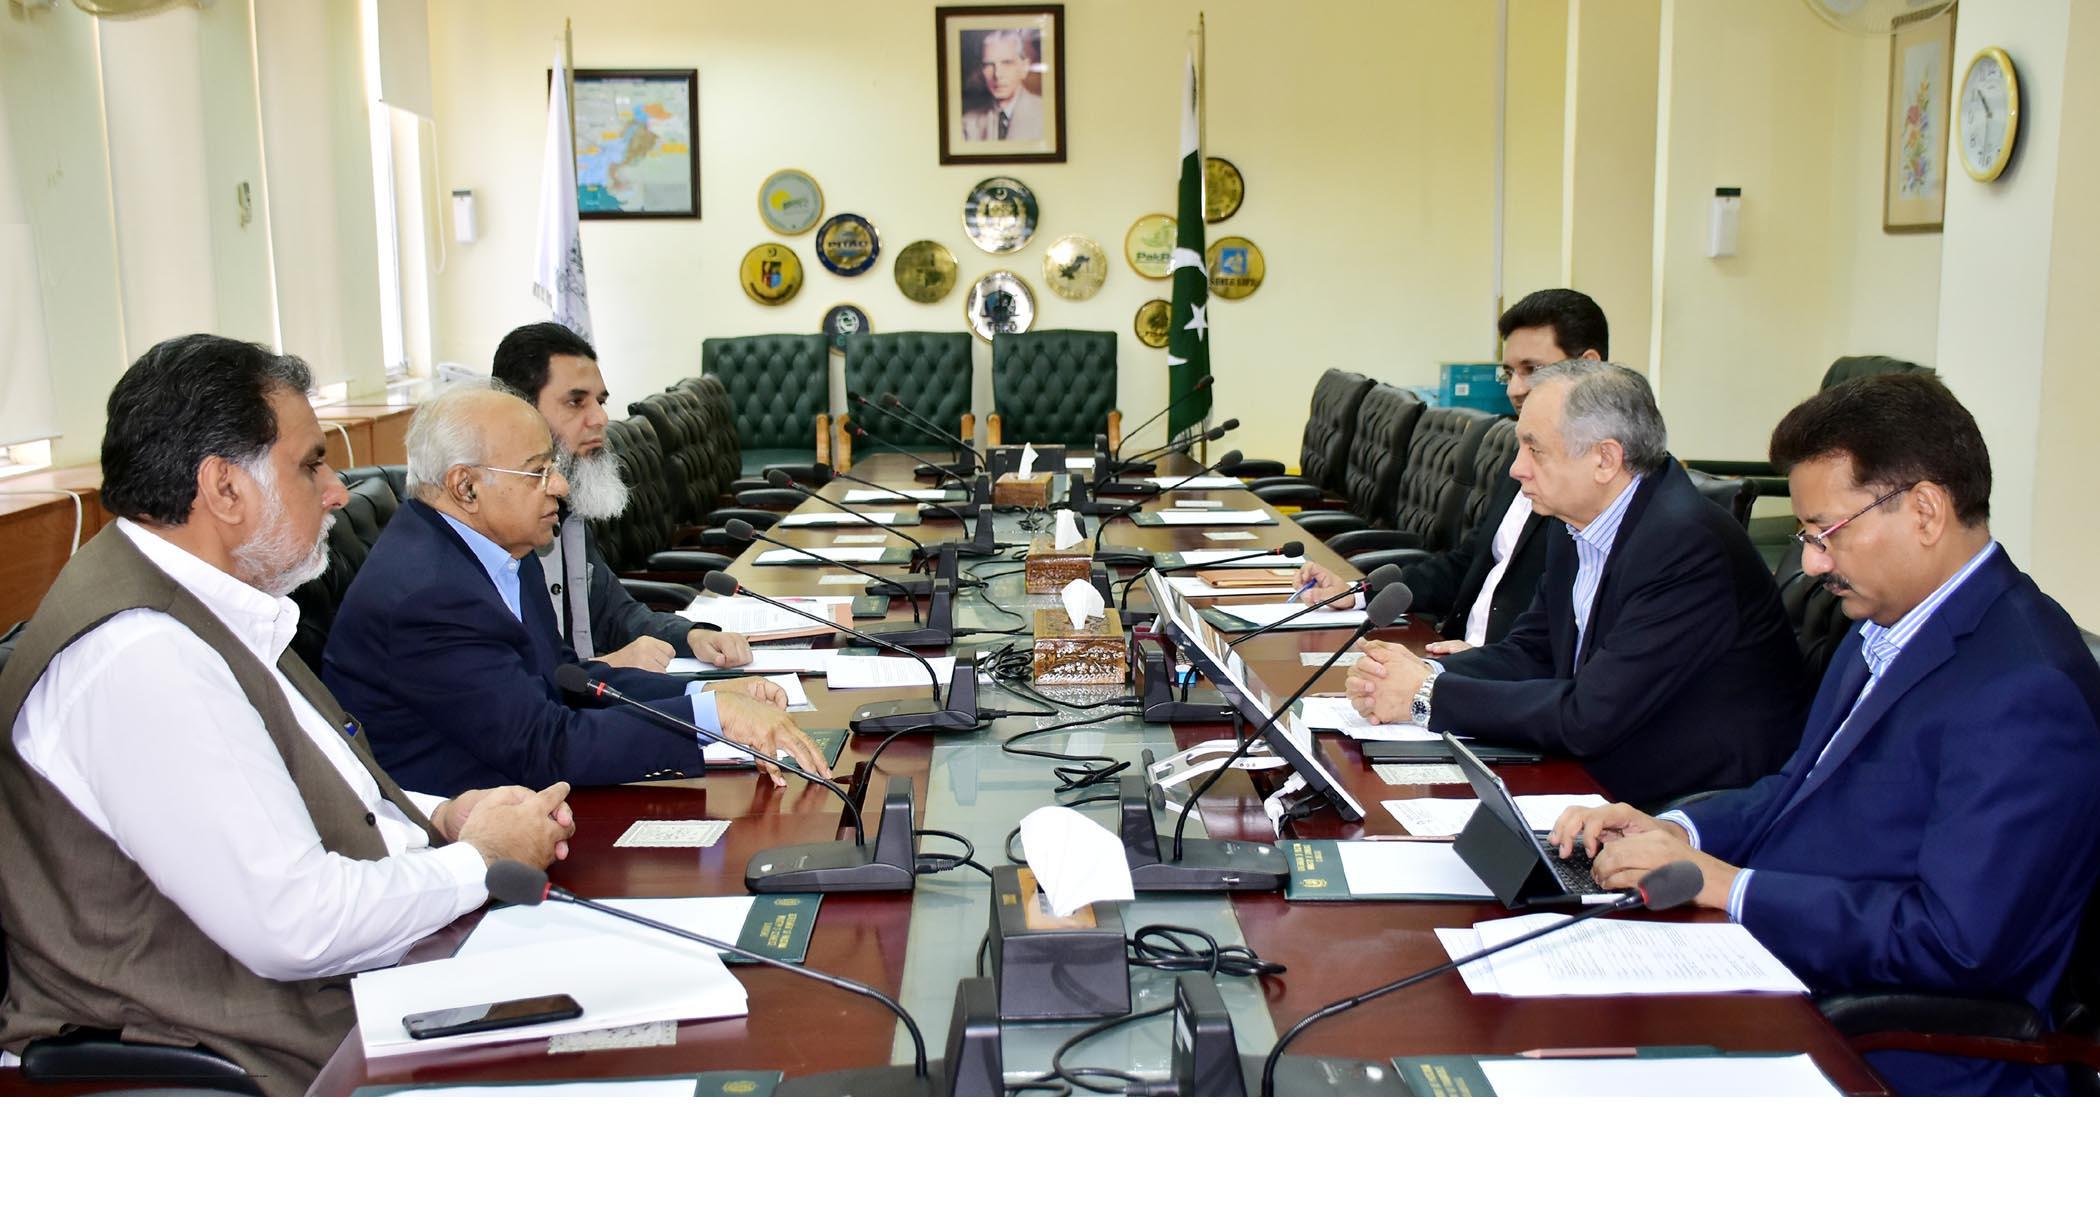 A DELEGATION FROM PAKISTAN POULTRY ASSOCIATION MEETING WITH ADVISOR TO THE PRIME MINISTER ON COMMERCE, TEXTILE, INDUSTRIES & PRODUCTION AND INVESTMENT, ABDUL RAZAK DAWOOD IN ISLAMABAD ON MAY 25, 2019.